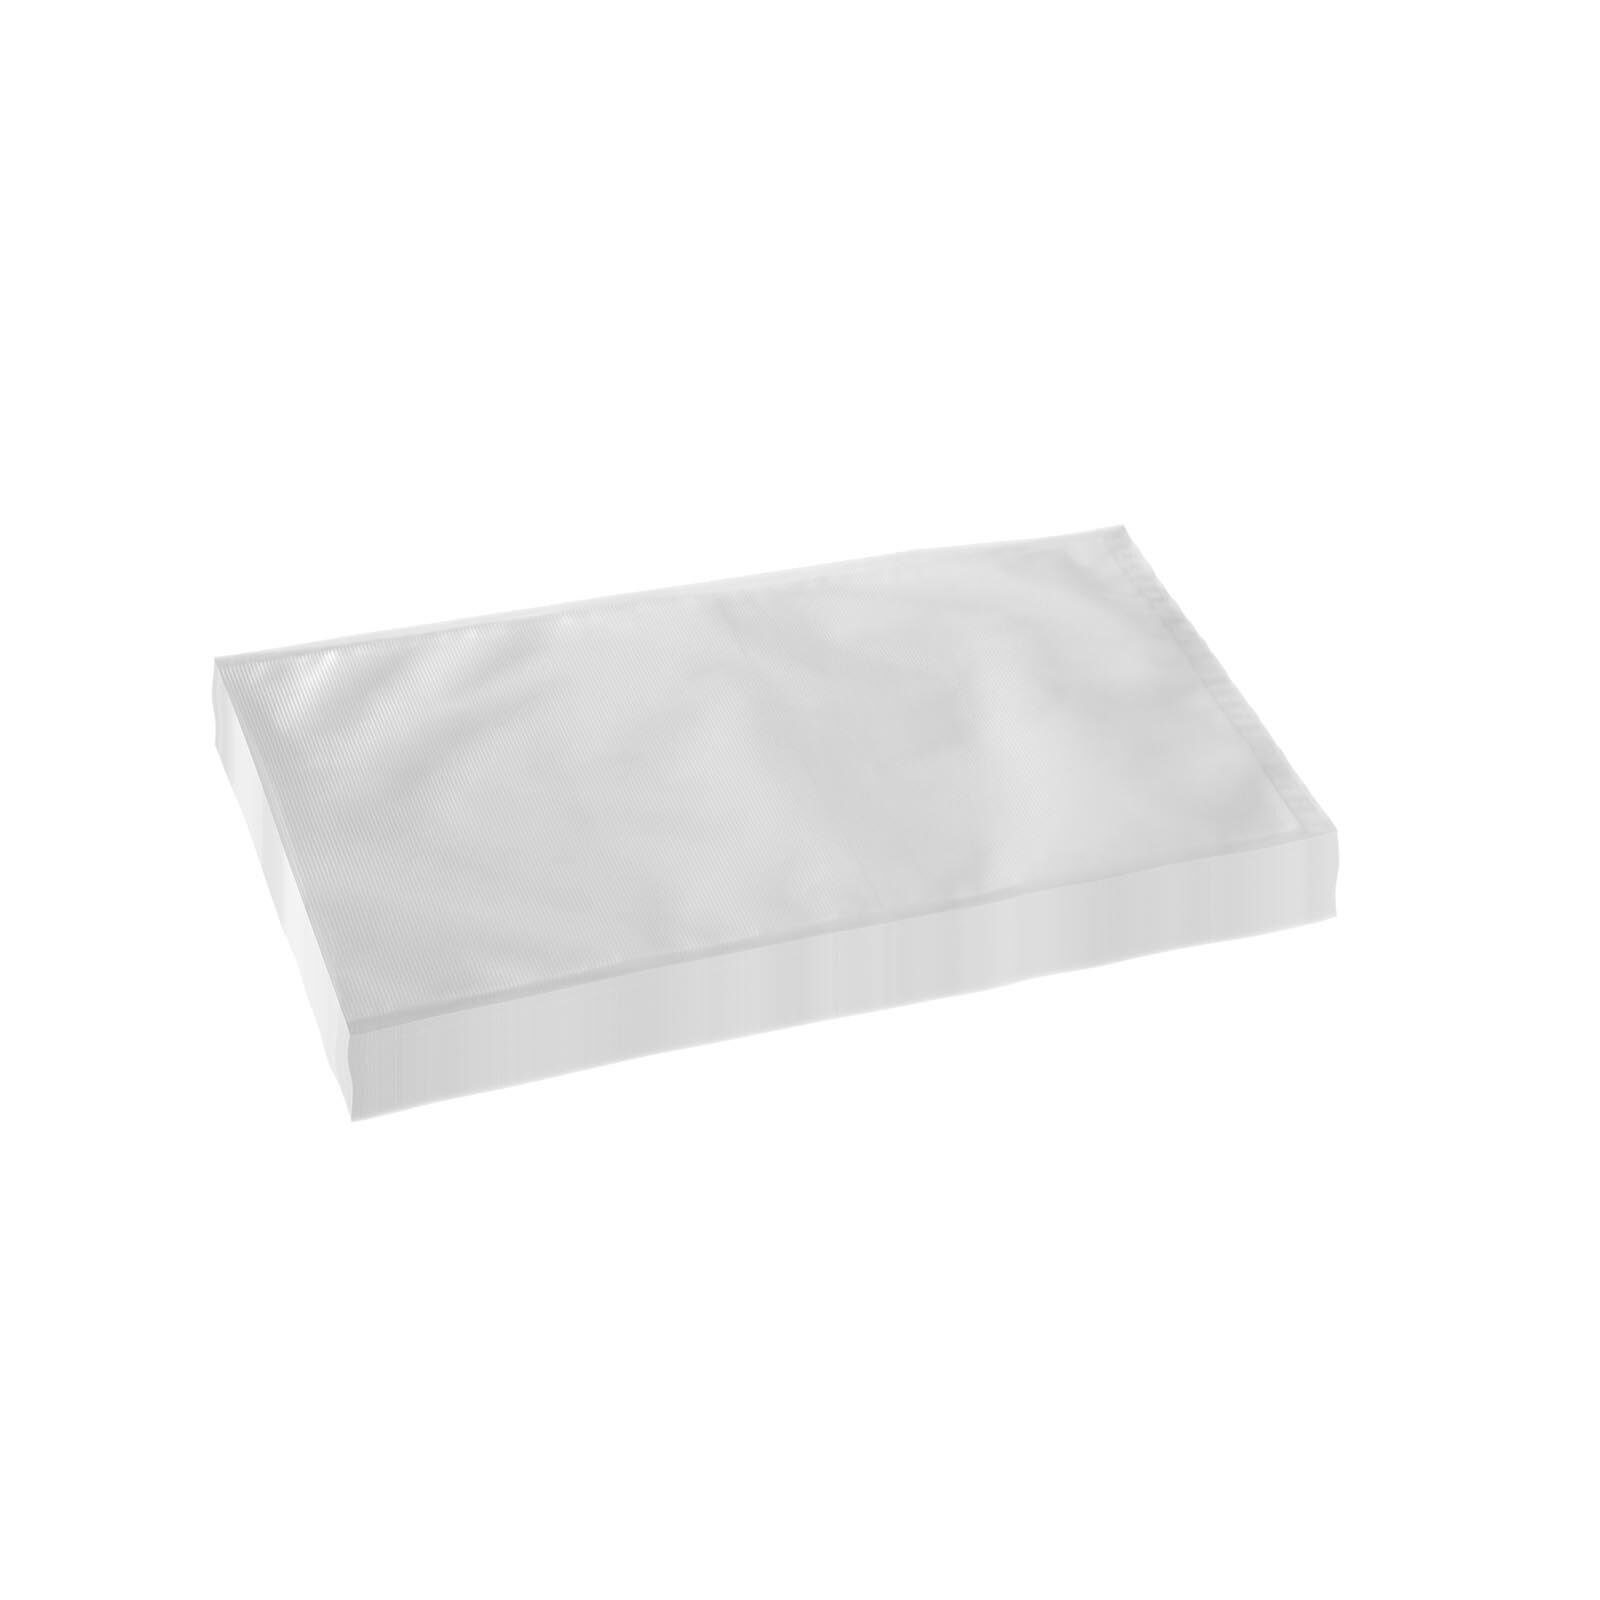 Royal Catering Vacuum Packaging Bags - 30 x 20 cm - 200 pieces